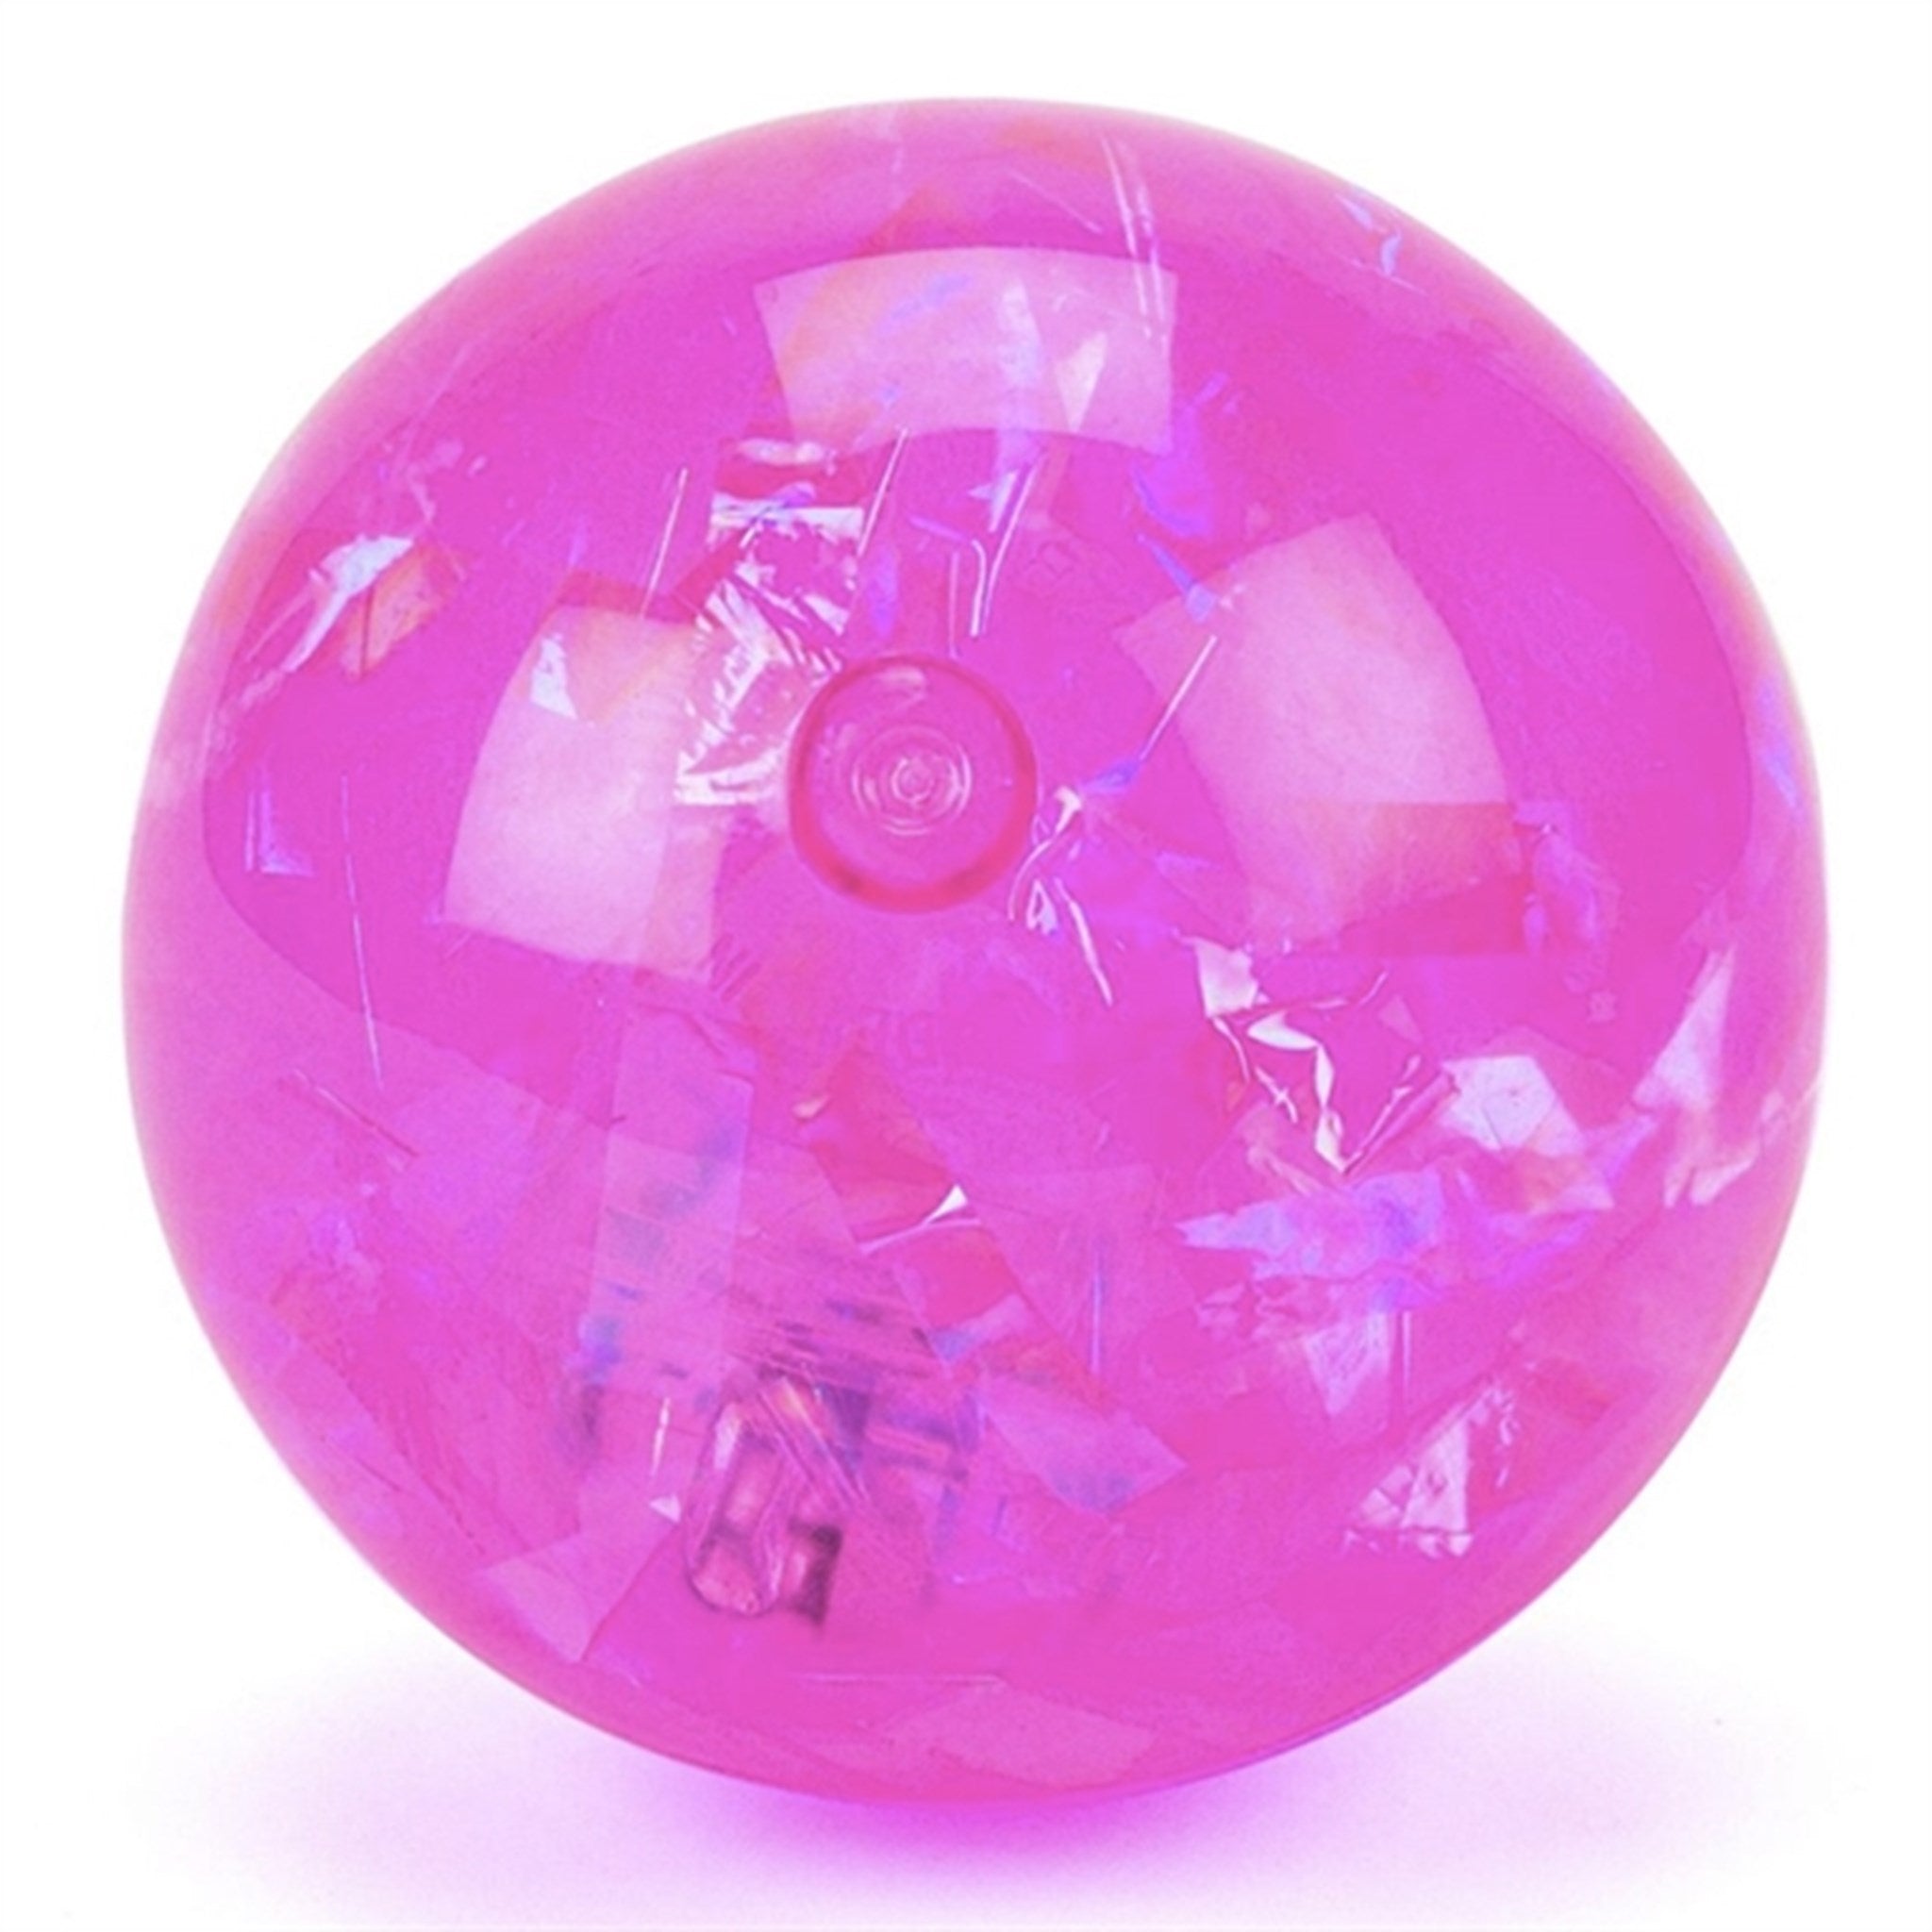 Magni Bouncing Ball With Light - Pink